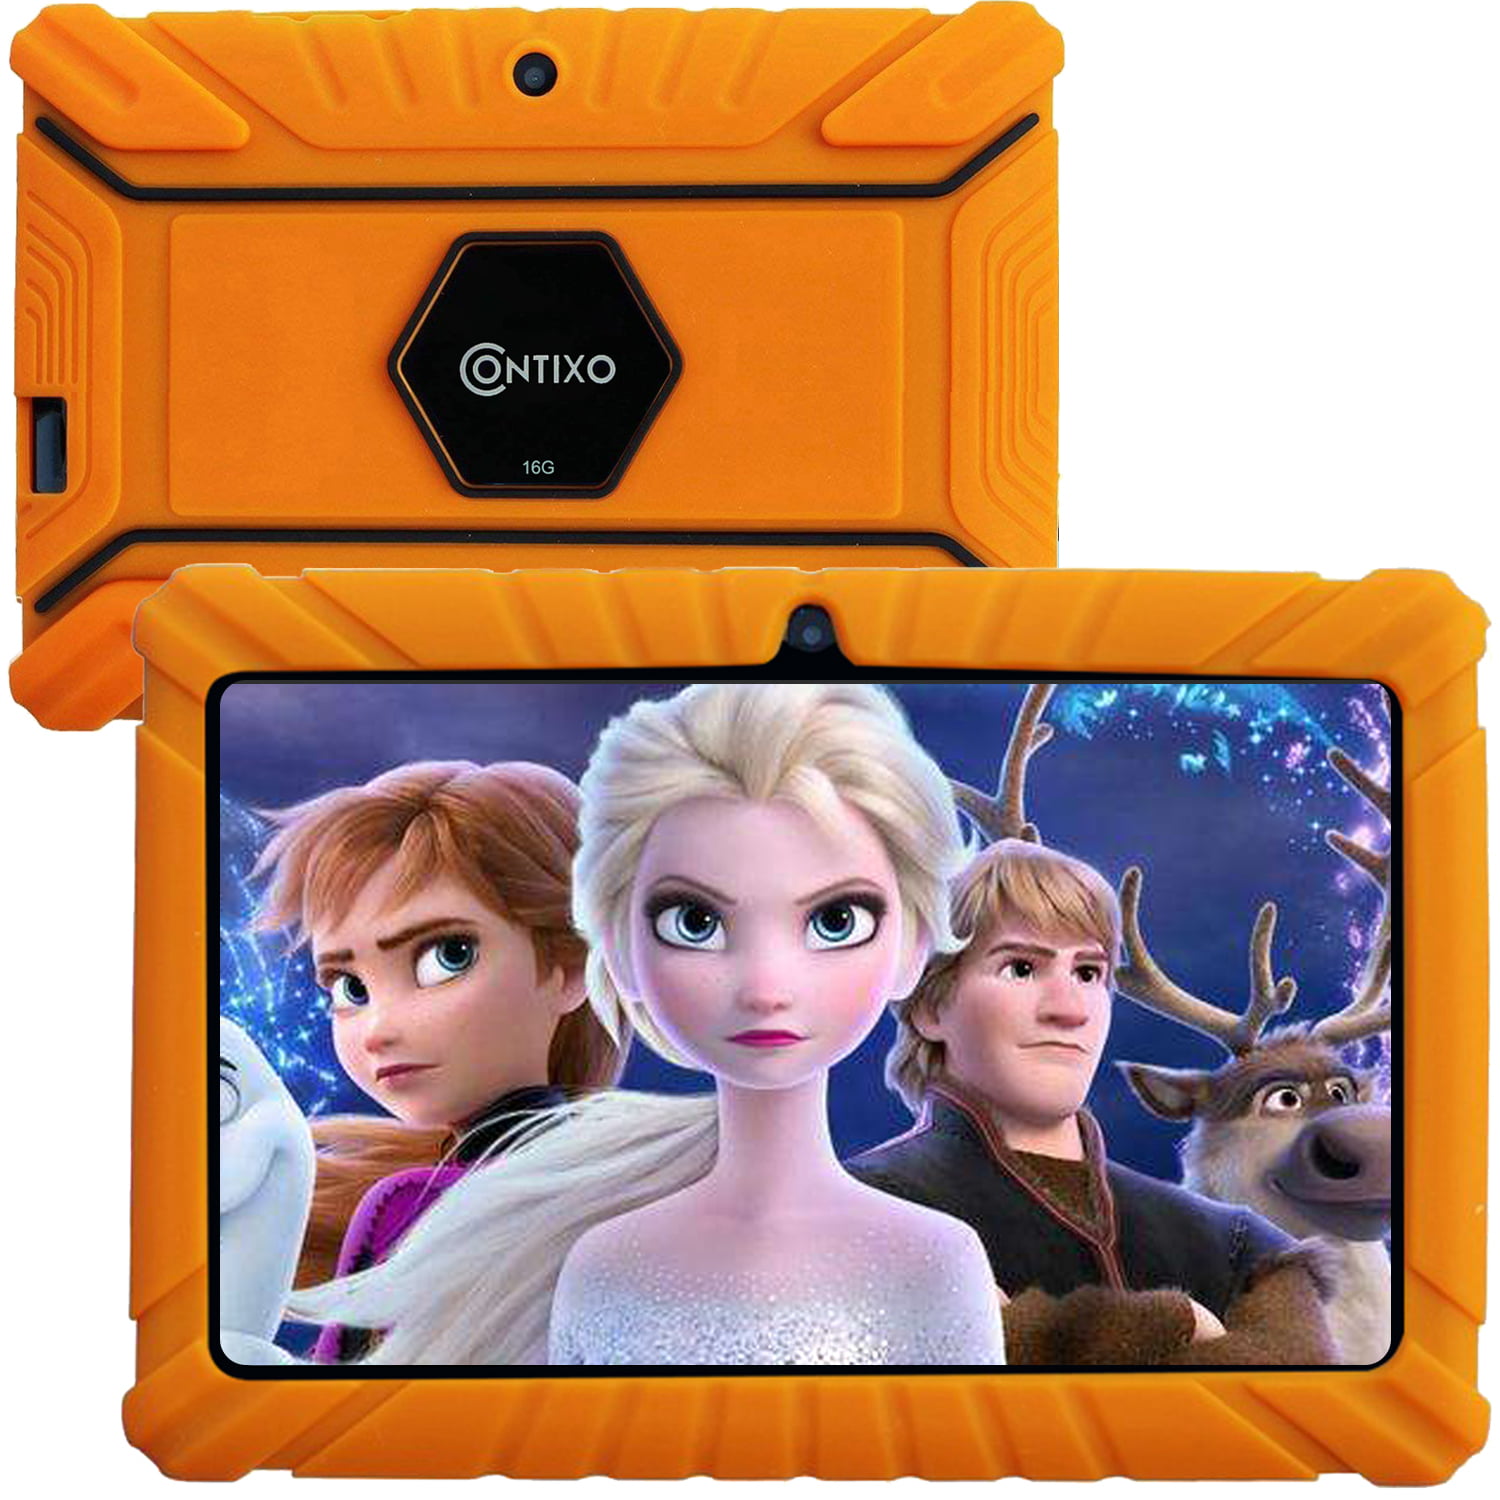 Contixo 7 inch Kids Tablet 2GB RAM 32GB WiFi Android 10.0 Tablet For Kids Bluetooth Parental Control Pre-Installed Learning Tablet Apps for Toddlers Children Kid-Proof Protective Case, V9-2 Orange